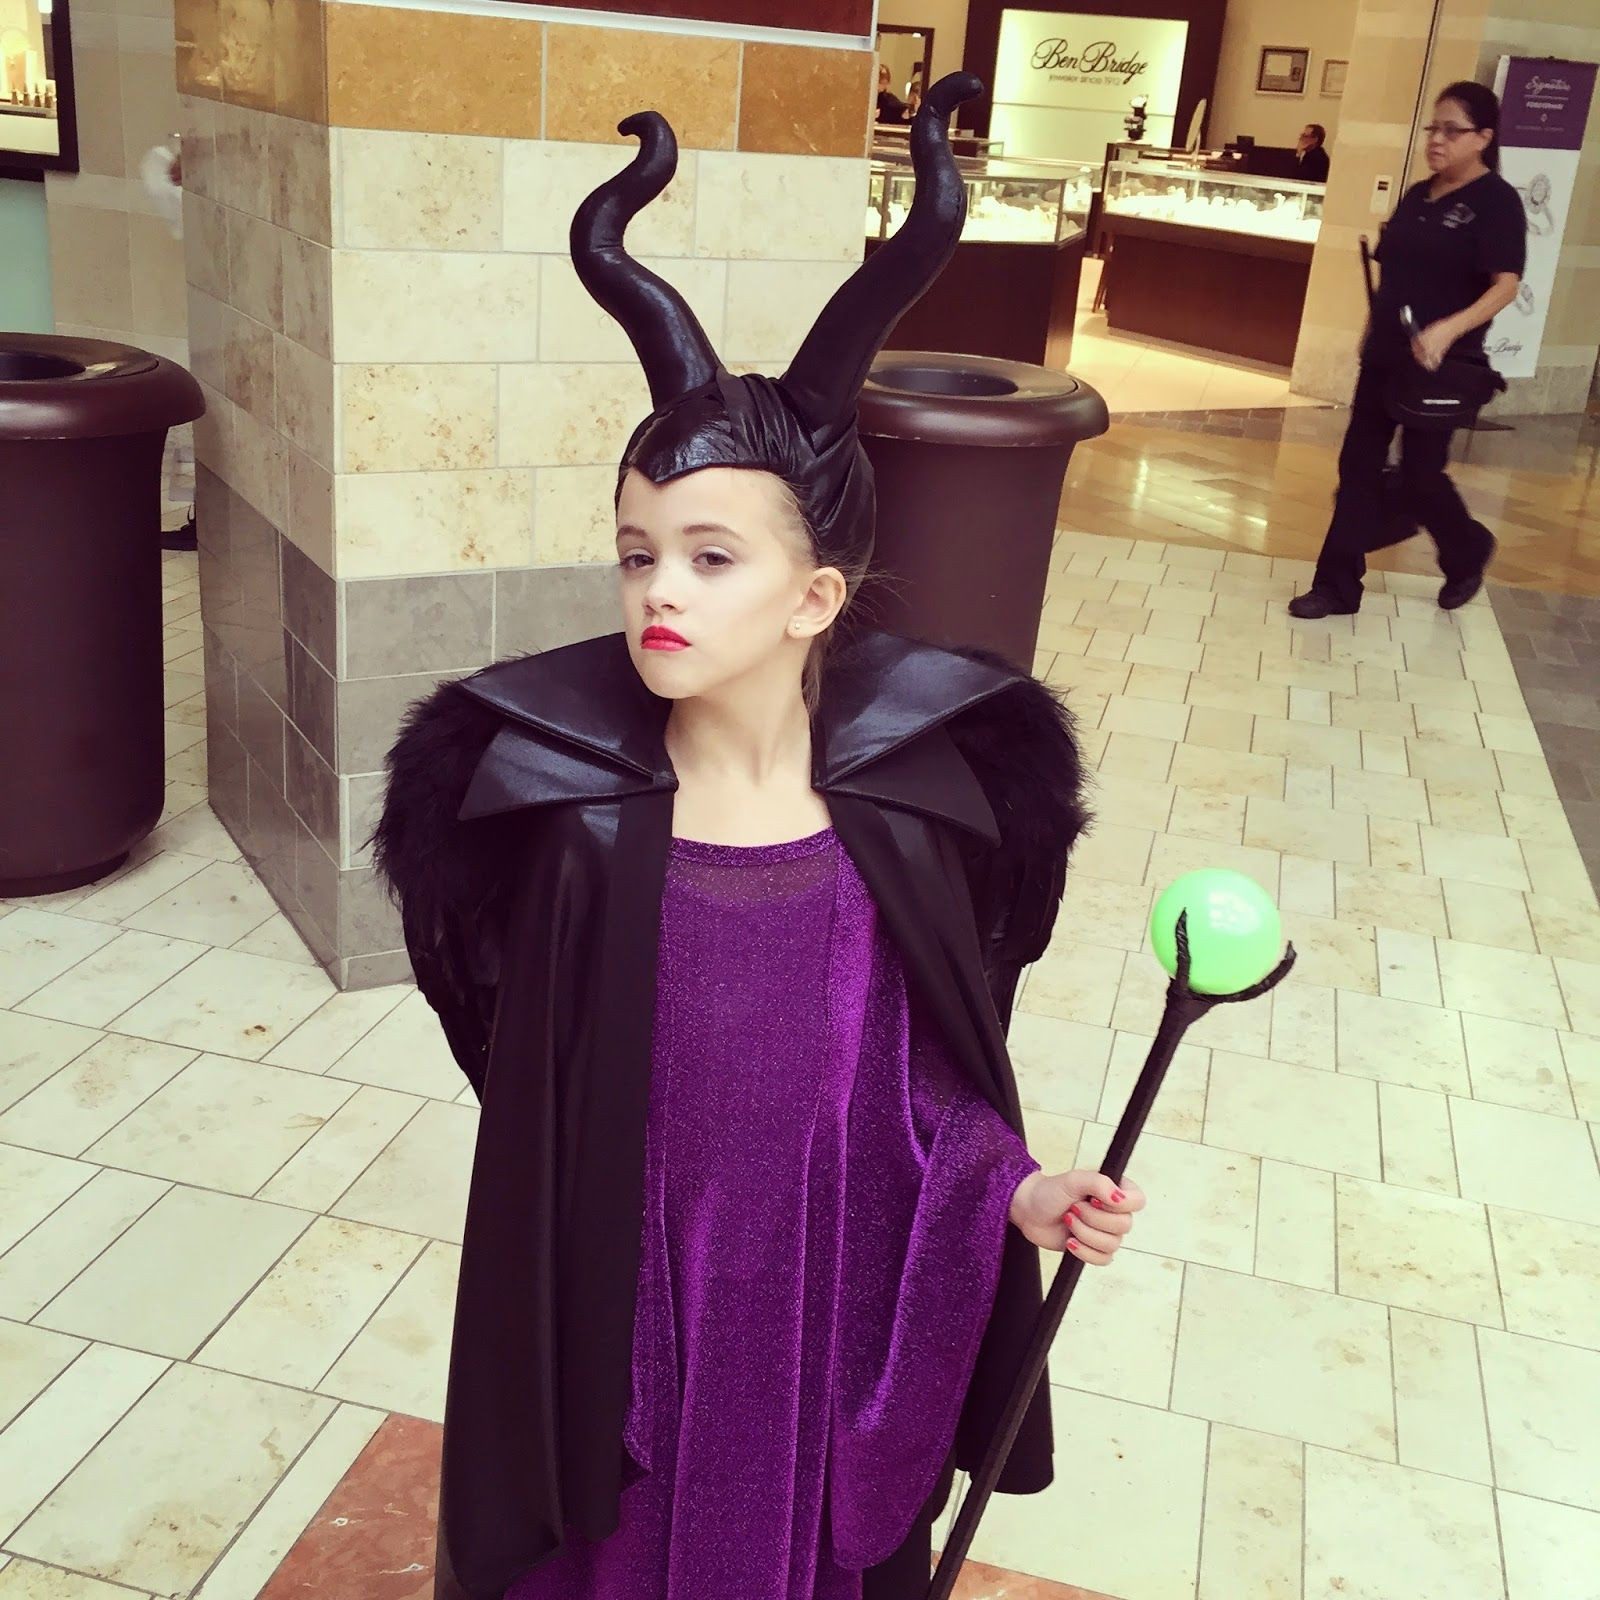 DIY Maleficent Costume
 Homemade Maleficent Costume DIY instructions and tips